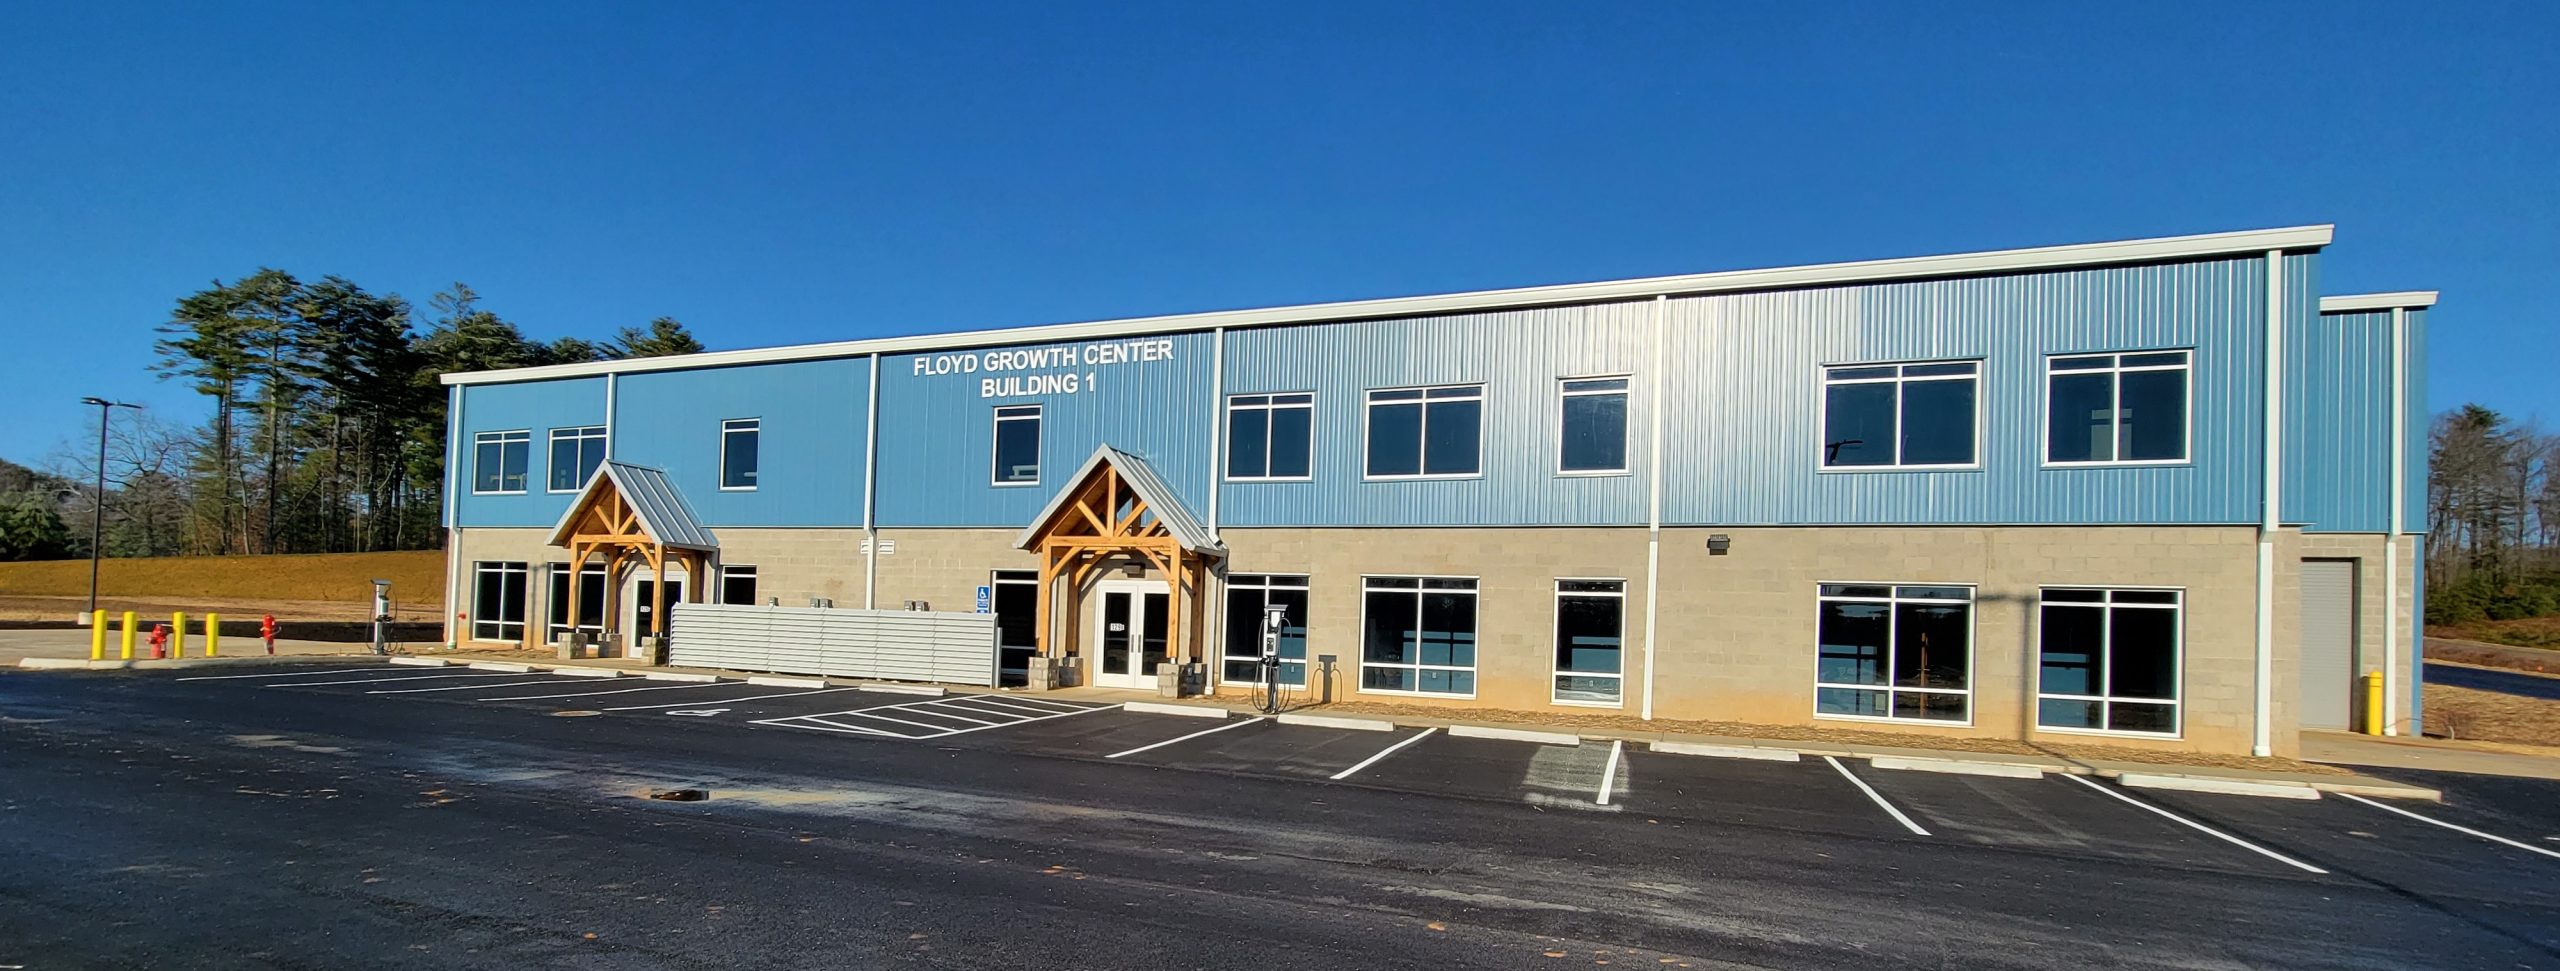 Floyd Growth Center Building complete